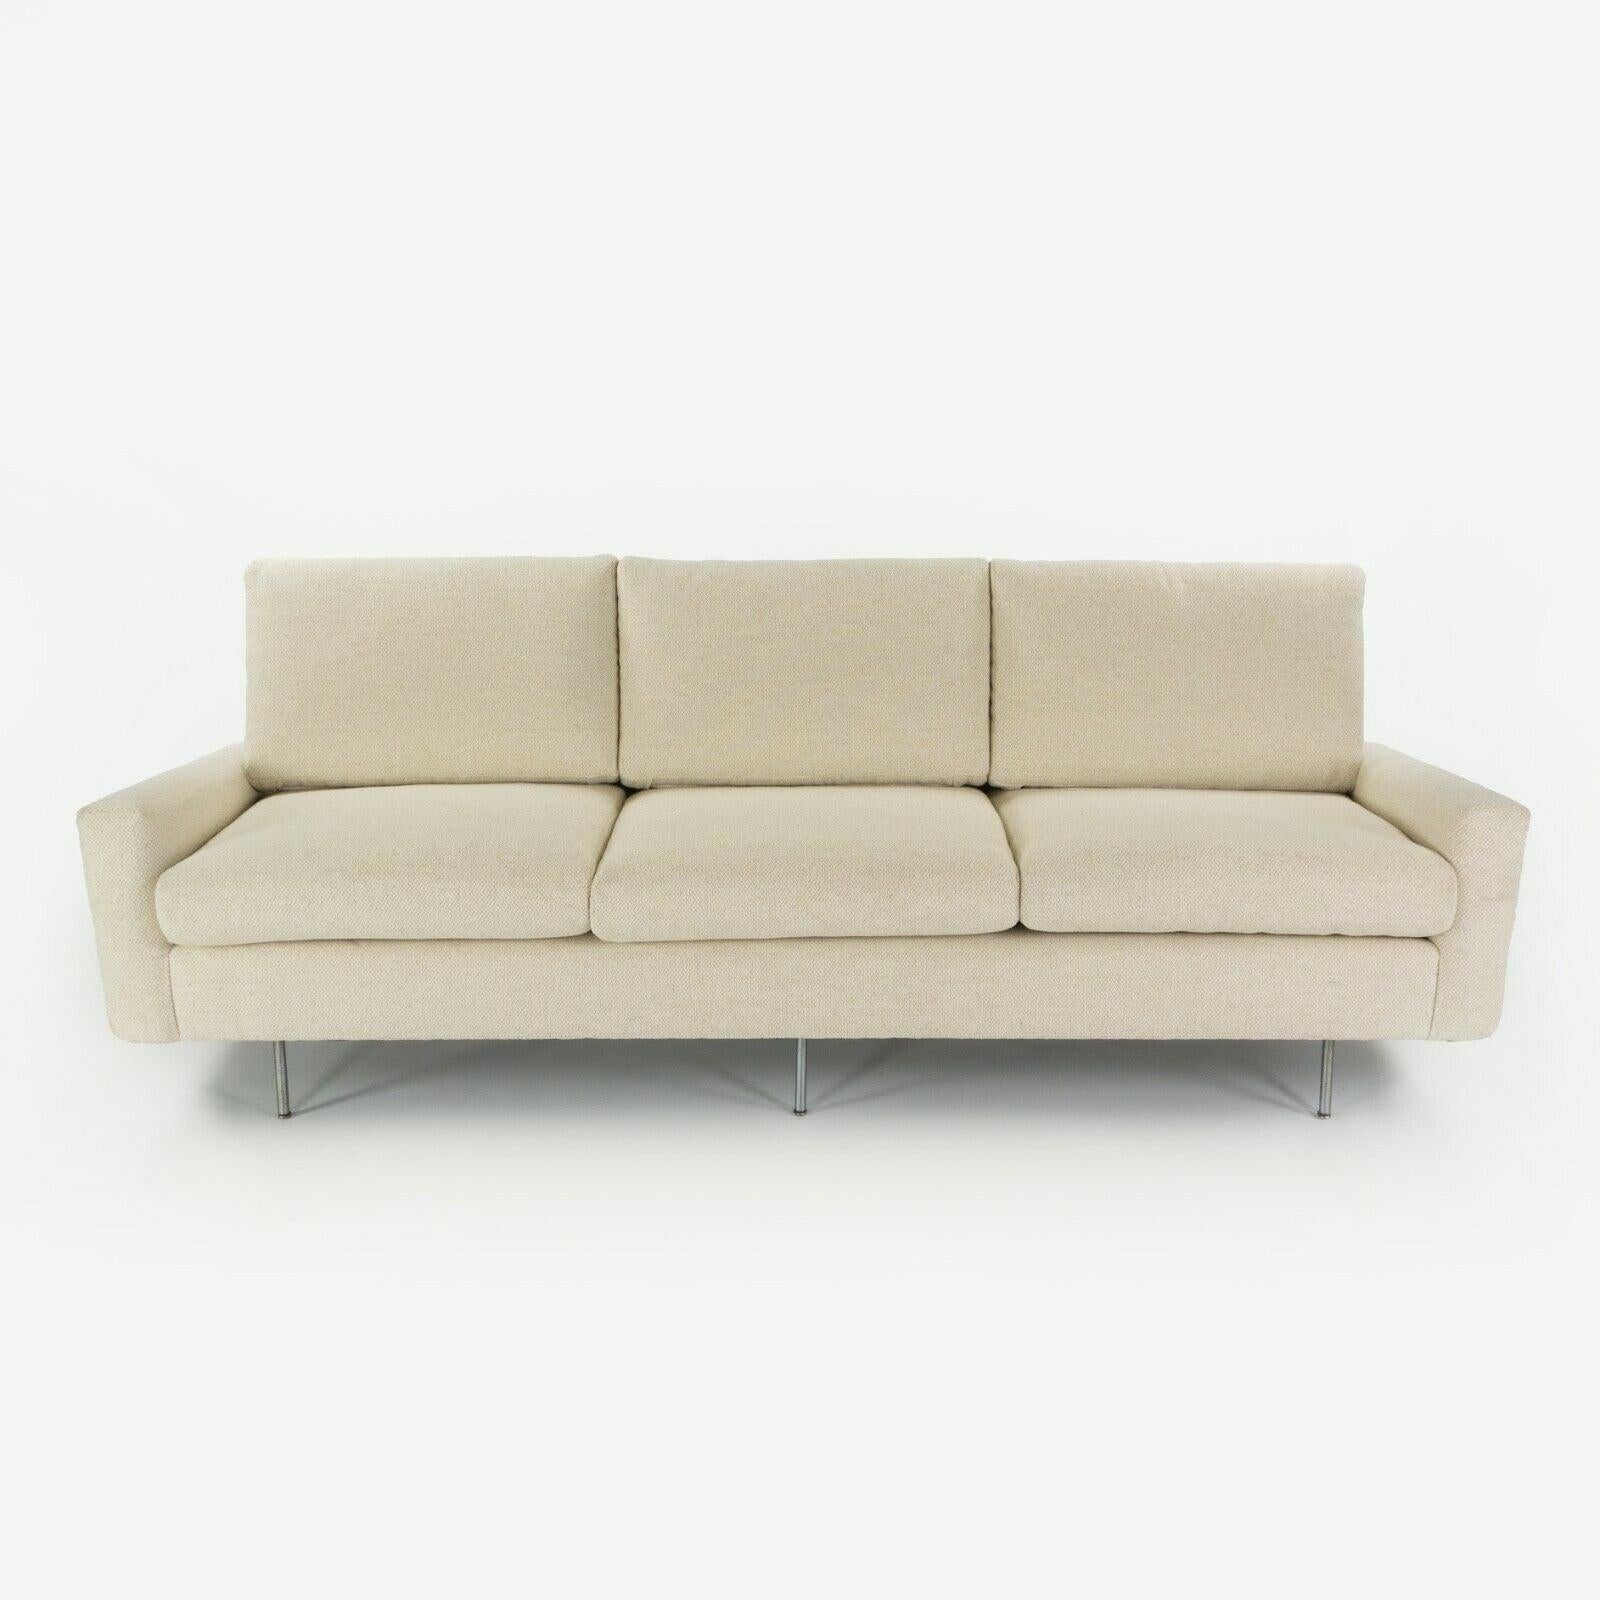 1949 Florence Knoll Associates 26 BC Upholstered 3-Seater Sofa New Upholstery